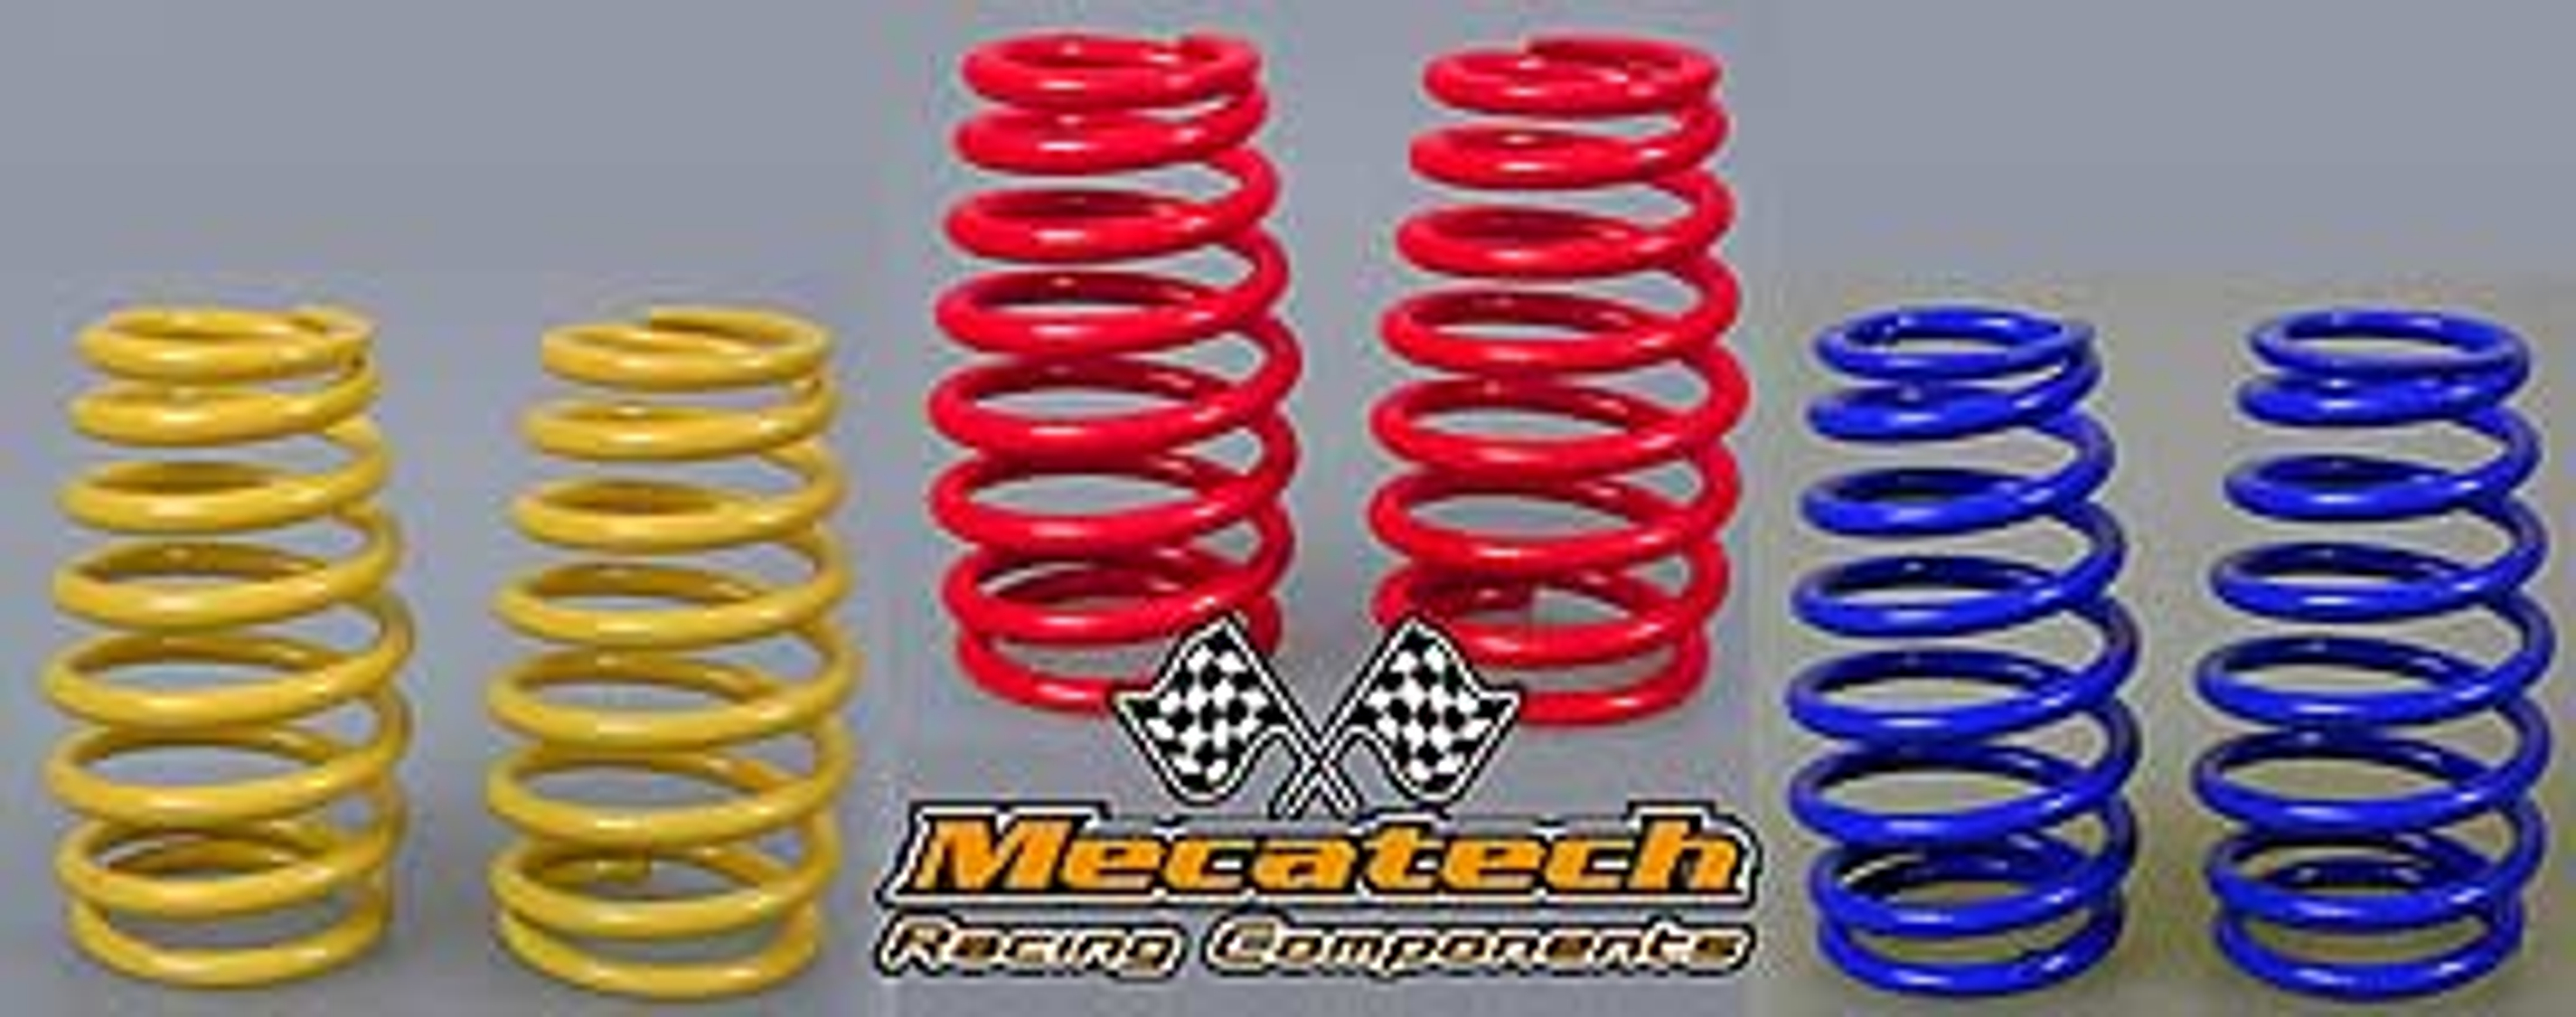 2009-05 Cask shaped springs for Mecatech Klick-Shocks  and Big Bore, sixpack